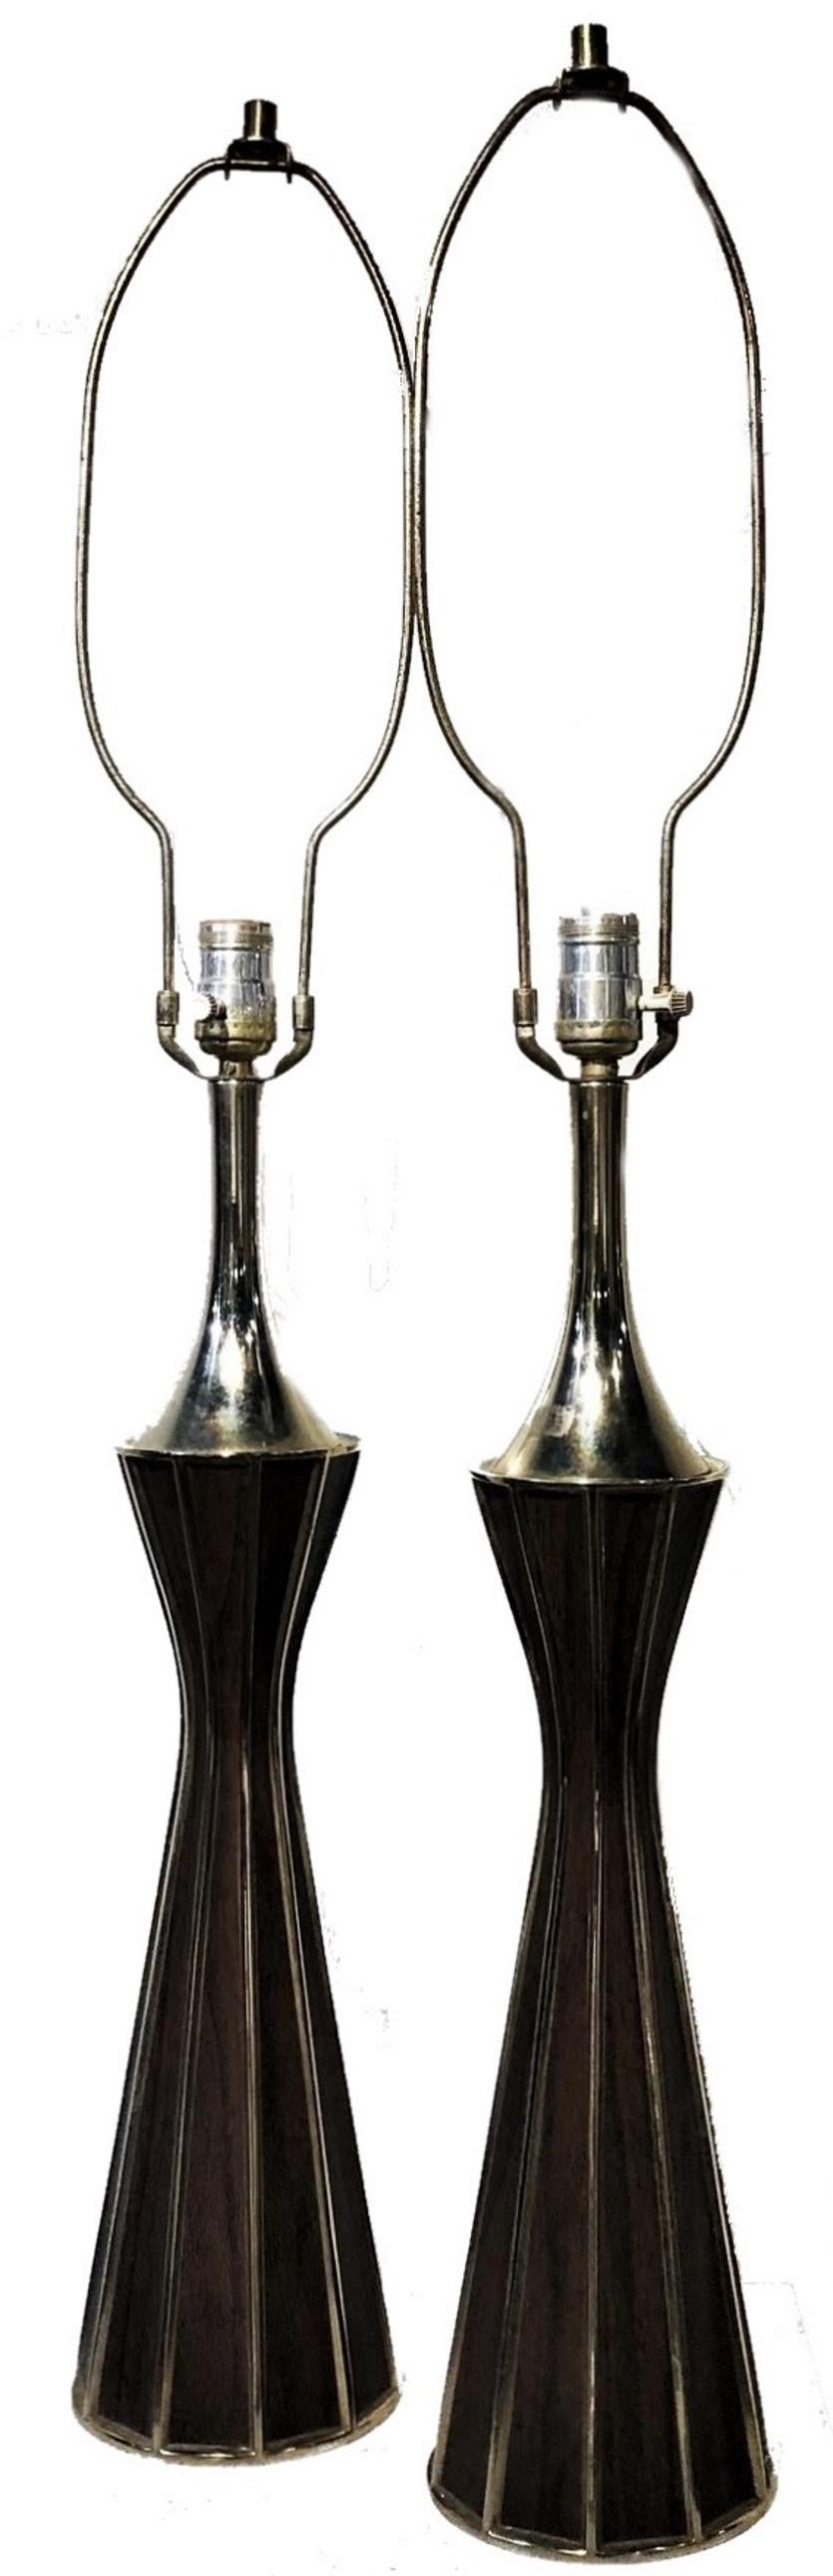 American Mid-Century Modernism
A Pair of Lamps
in Mastercraft Style 
Brass and Wood 
ca. 1960s

ABOUT
Mastercraft was founded in Grand Rapids, Michigan in 1946 by brothers Charles and William Doezema-who came from a family of cabinet makers. The